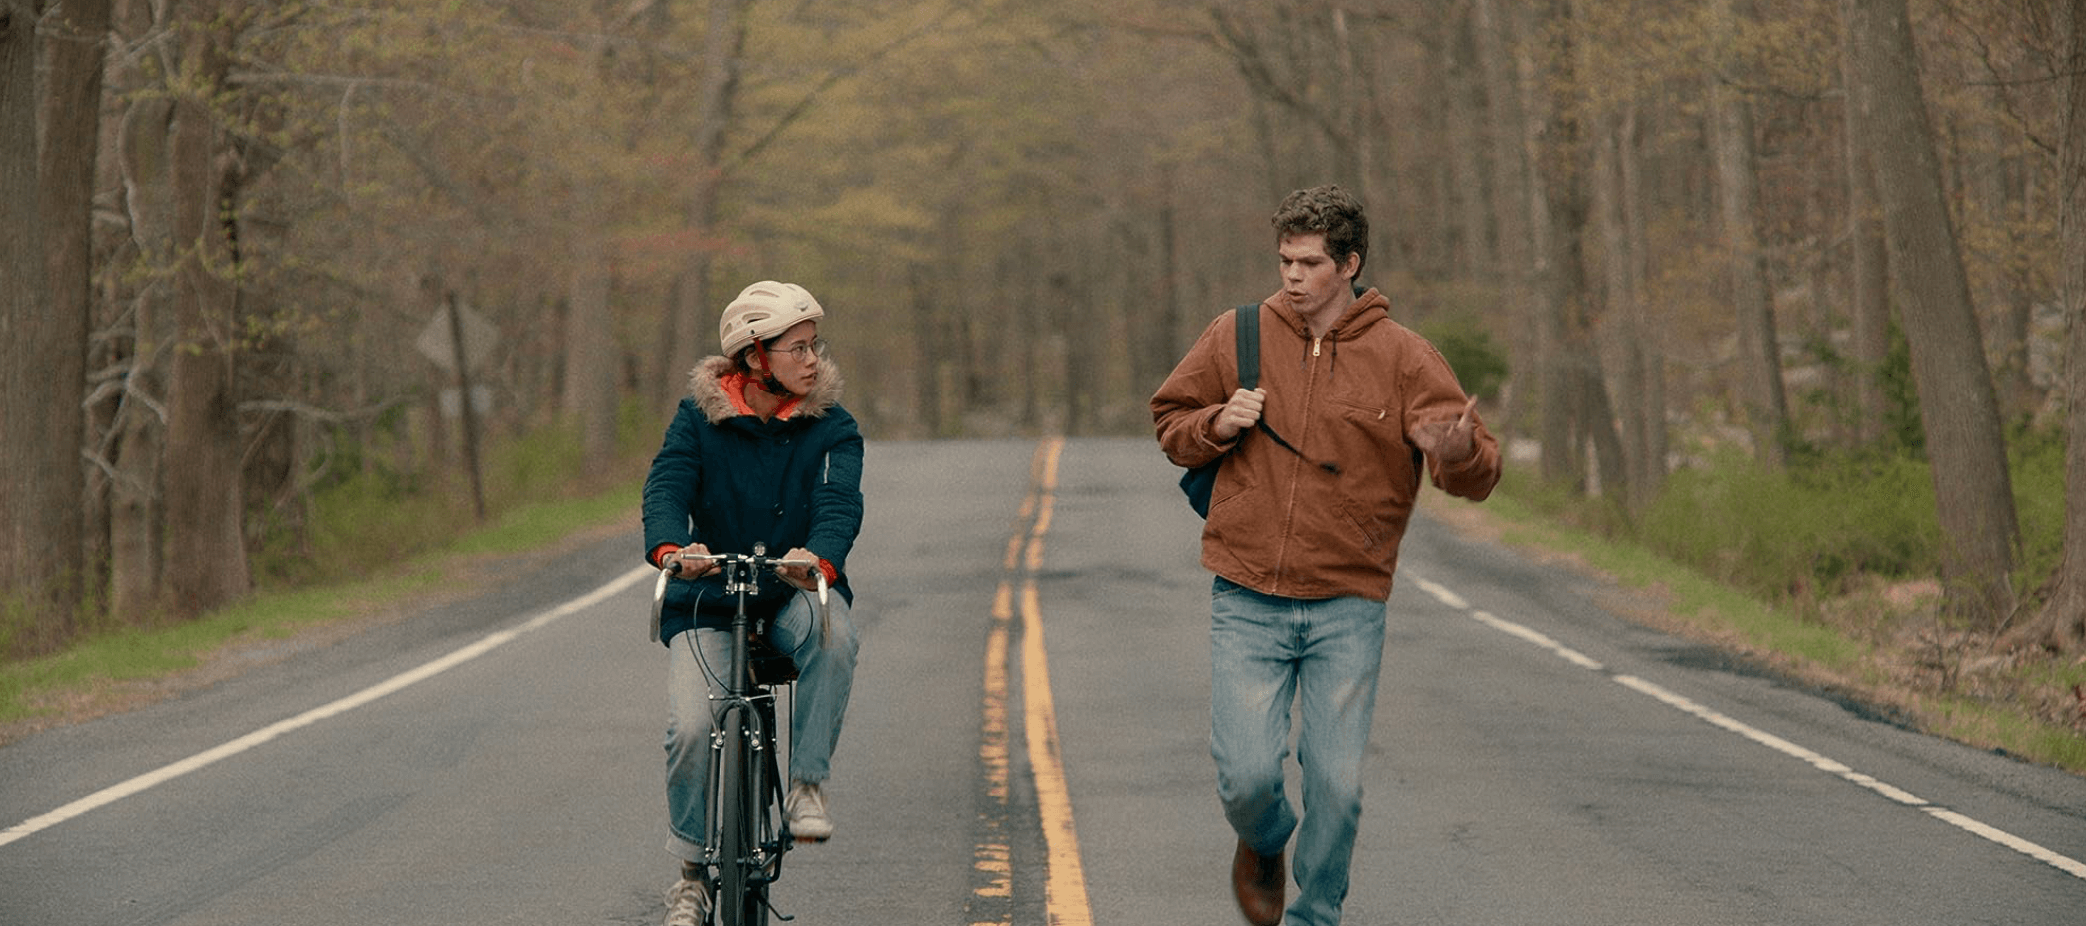 Bookish Ellie (Leah Lewis) and sporty Paul (Daniel Diemer) form an unlikely friendship that’s as touching as the film’s romantic relationship